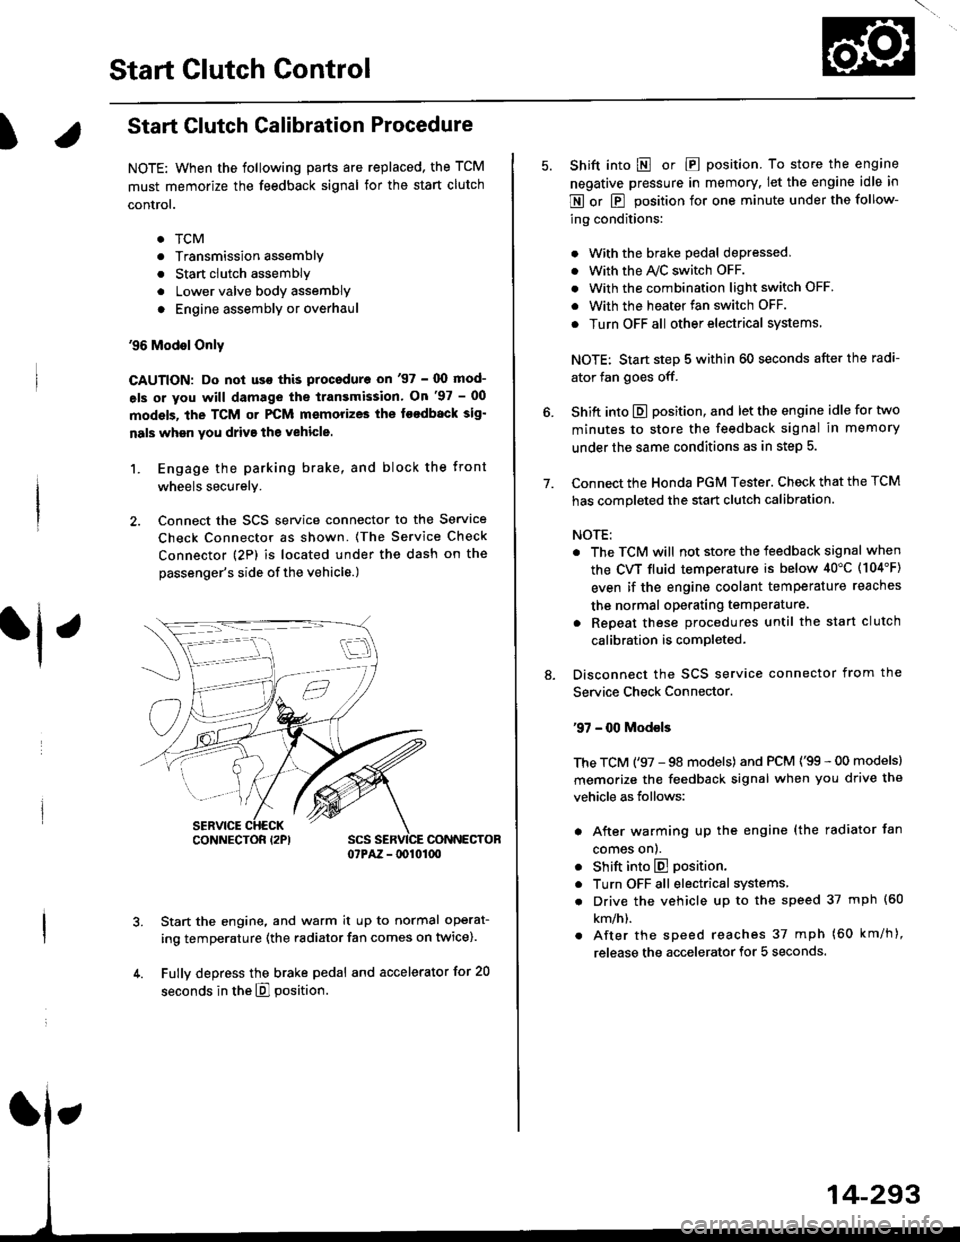 HONDA CIVIC 1996 6.G Owners Guide Start Clutch Control@
T
Start Clutch Calibration Procedure
NOTE: When the following parts are replaced, the TCM
must memorize the feedback signal for the start clutch
control.
. TCM
. Transmissionasse